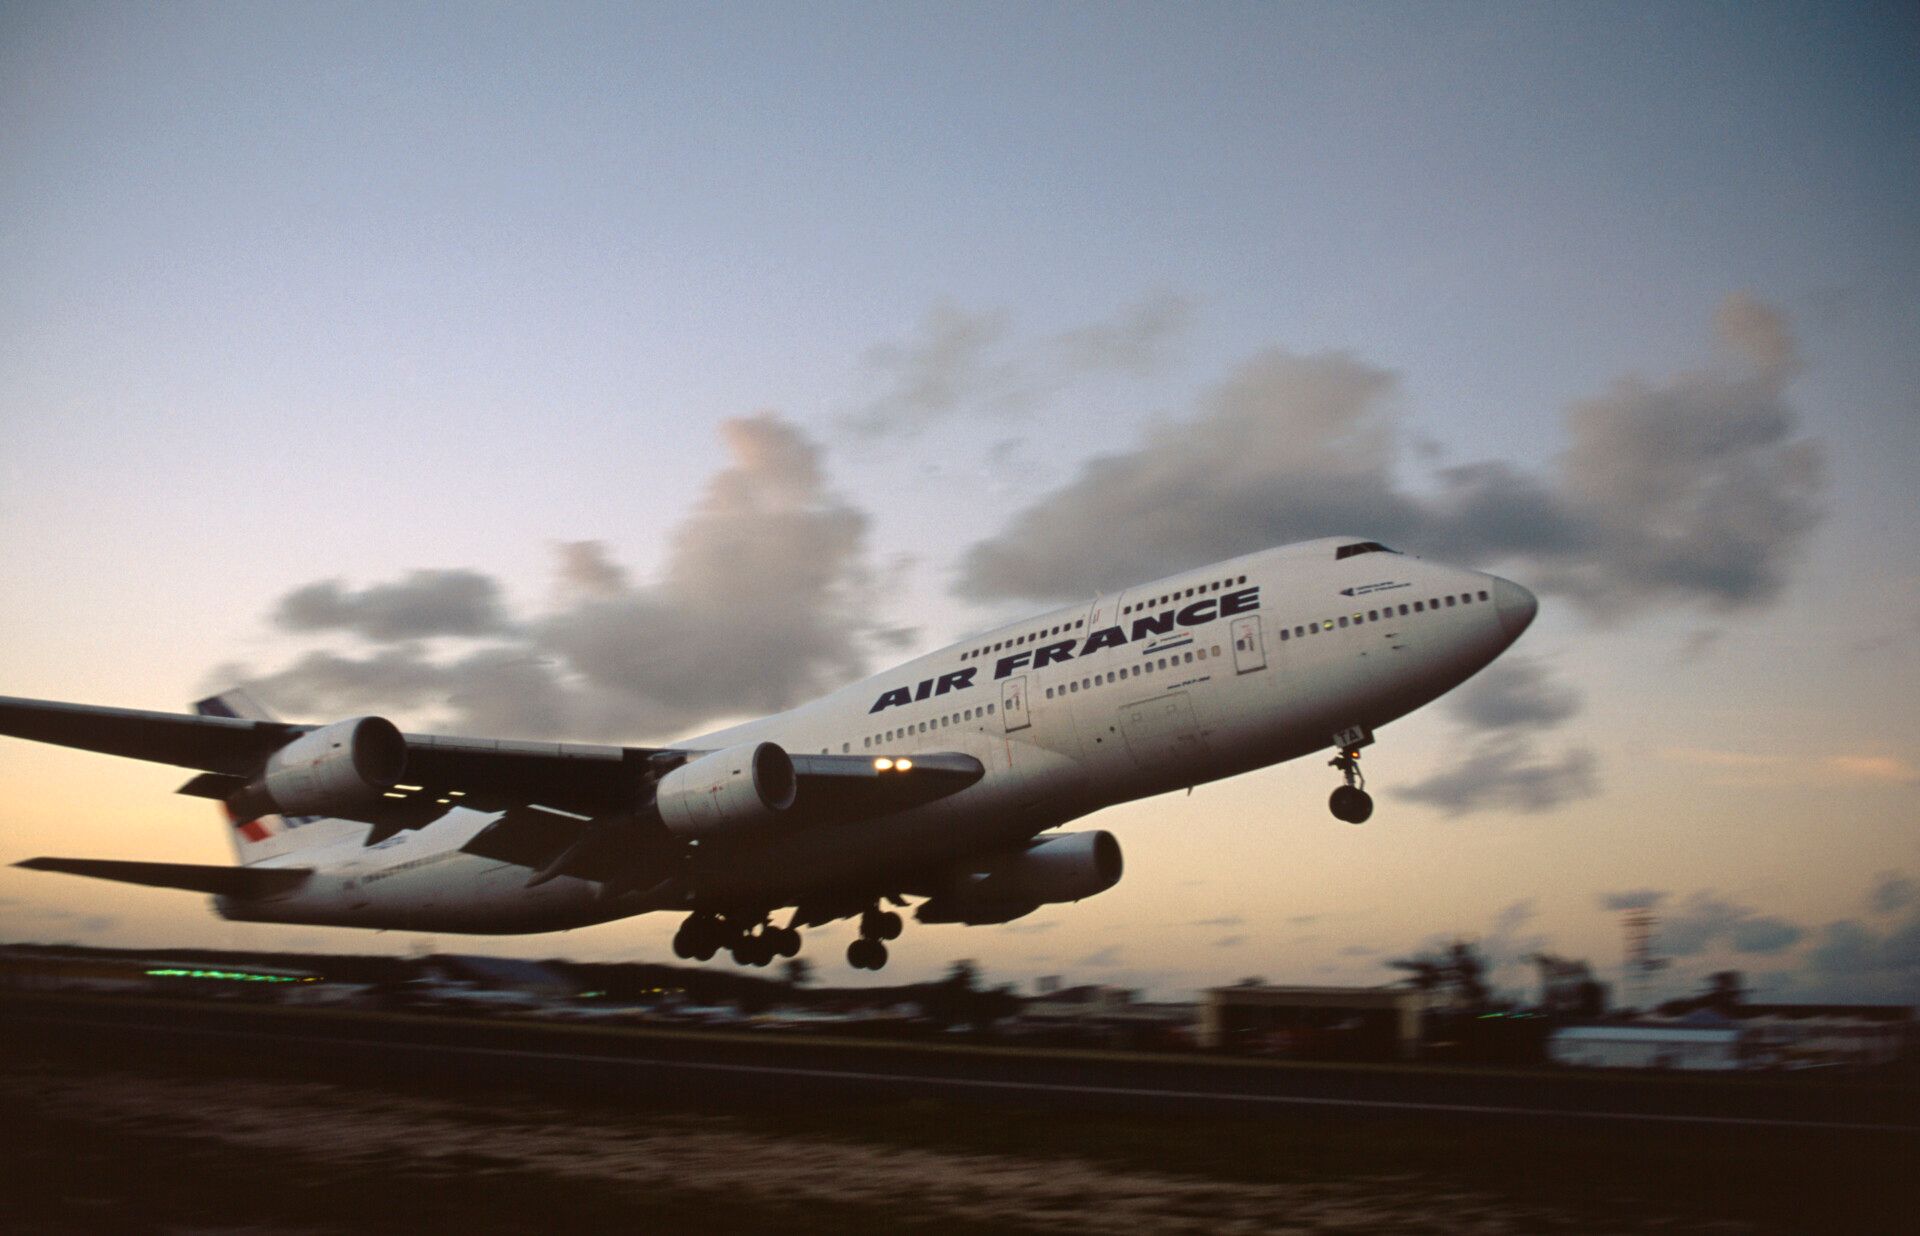 Air France Boeing 747-300 Combi taking-off at dusk